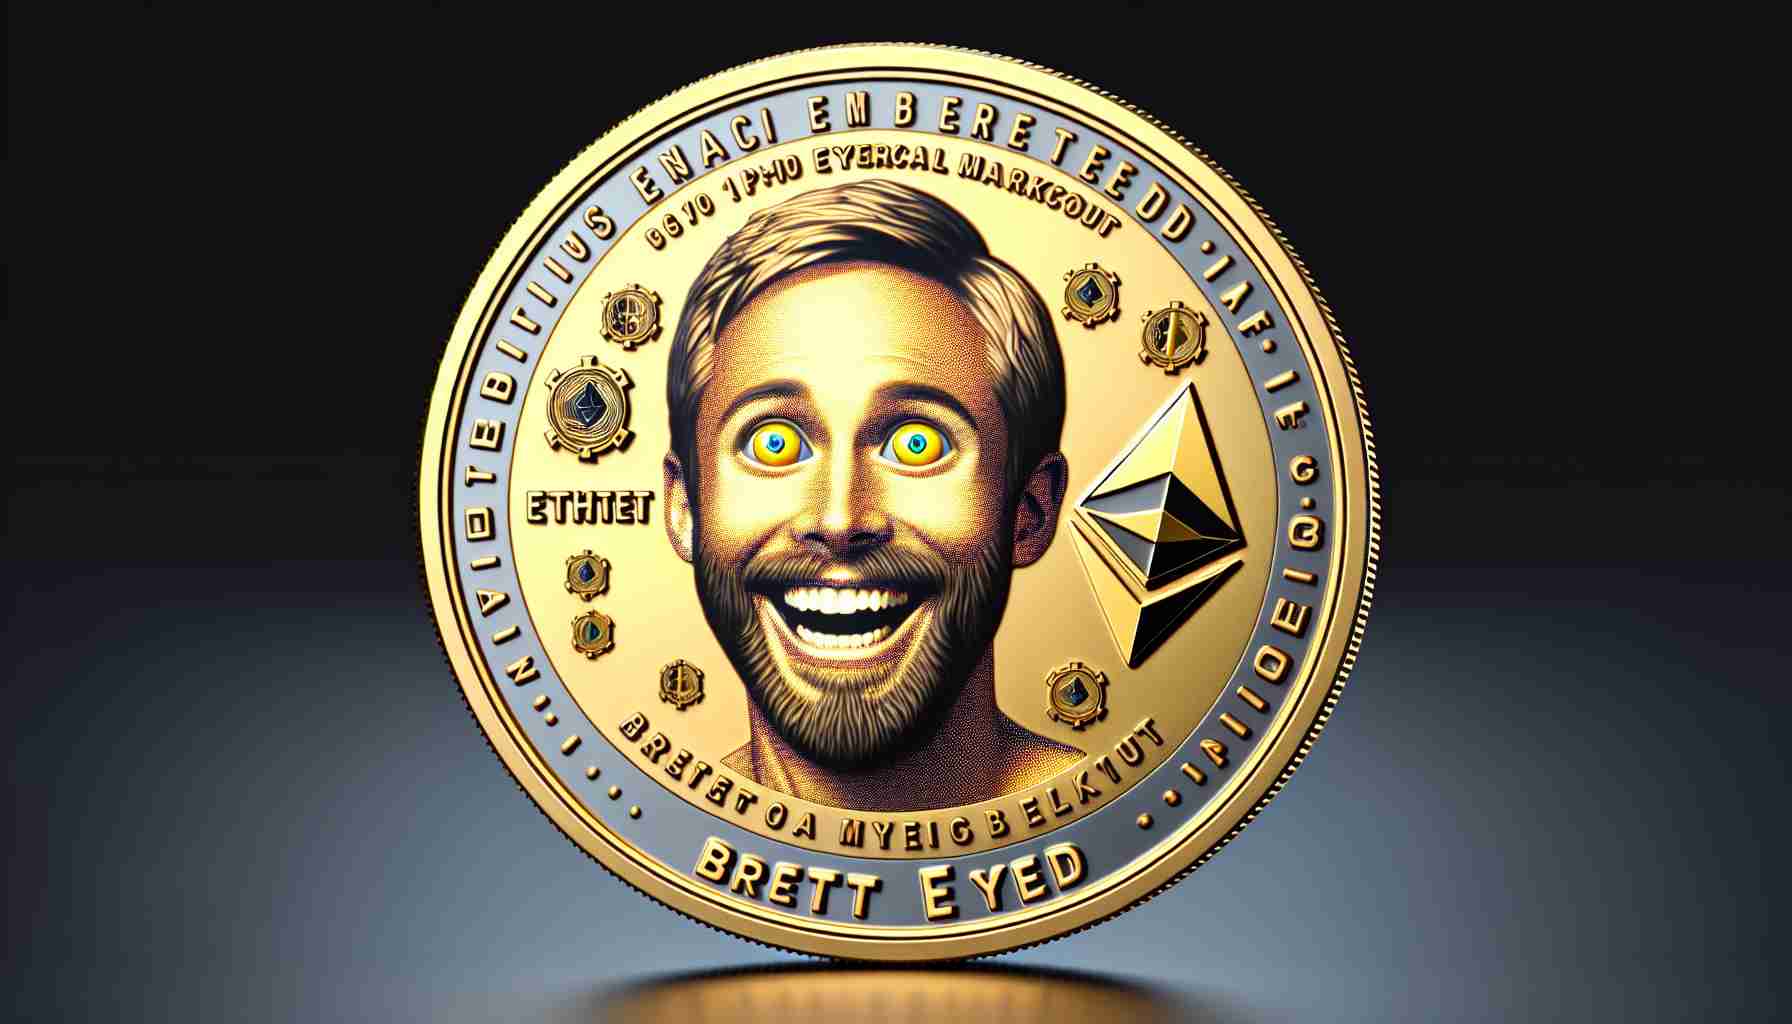 Realistically rendered high definition image of an Ethereum-based memecoin with the name 'Brett Eyed', depicted in a way that signifies a potential financial market breakout. The coin could feature designs or symbols related to Ethereum and the energy of a breakout. Please avoid representations of real figures.